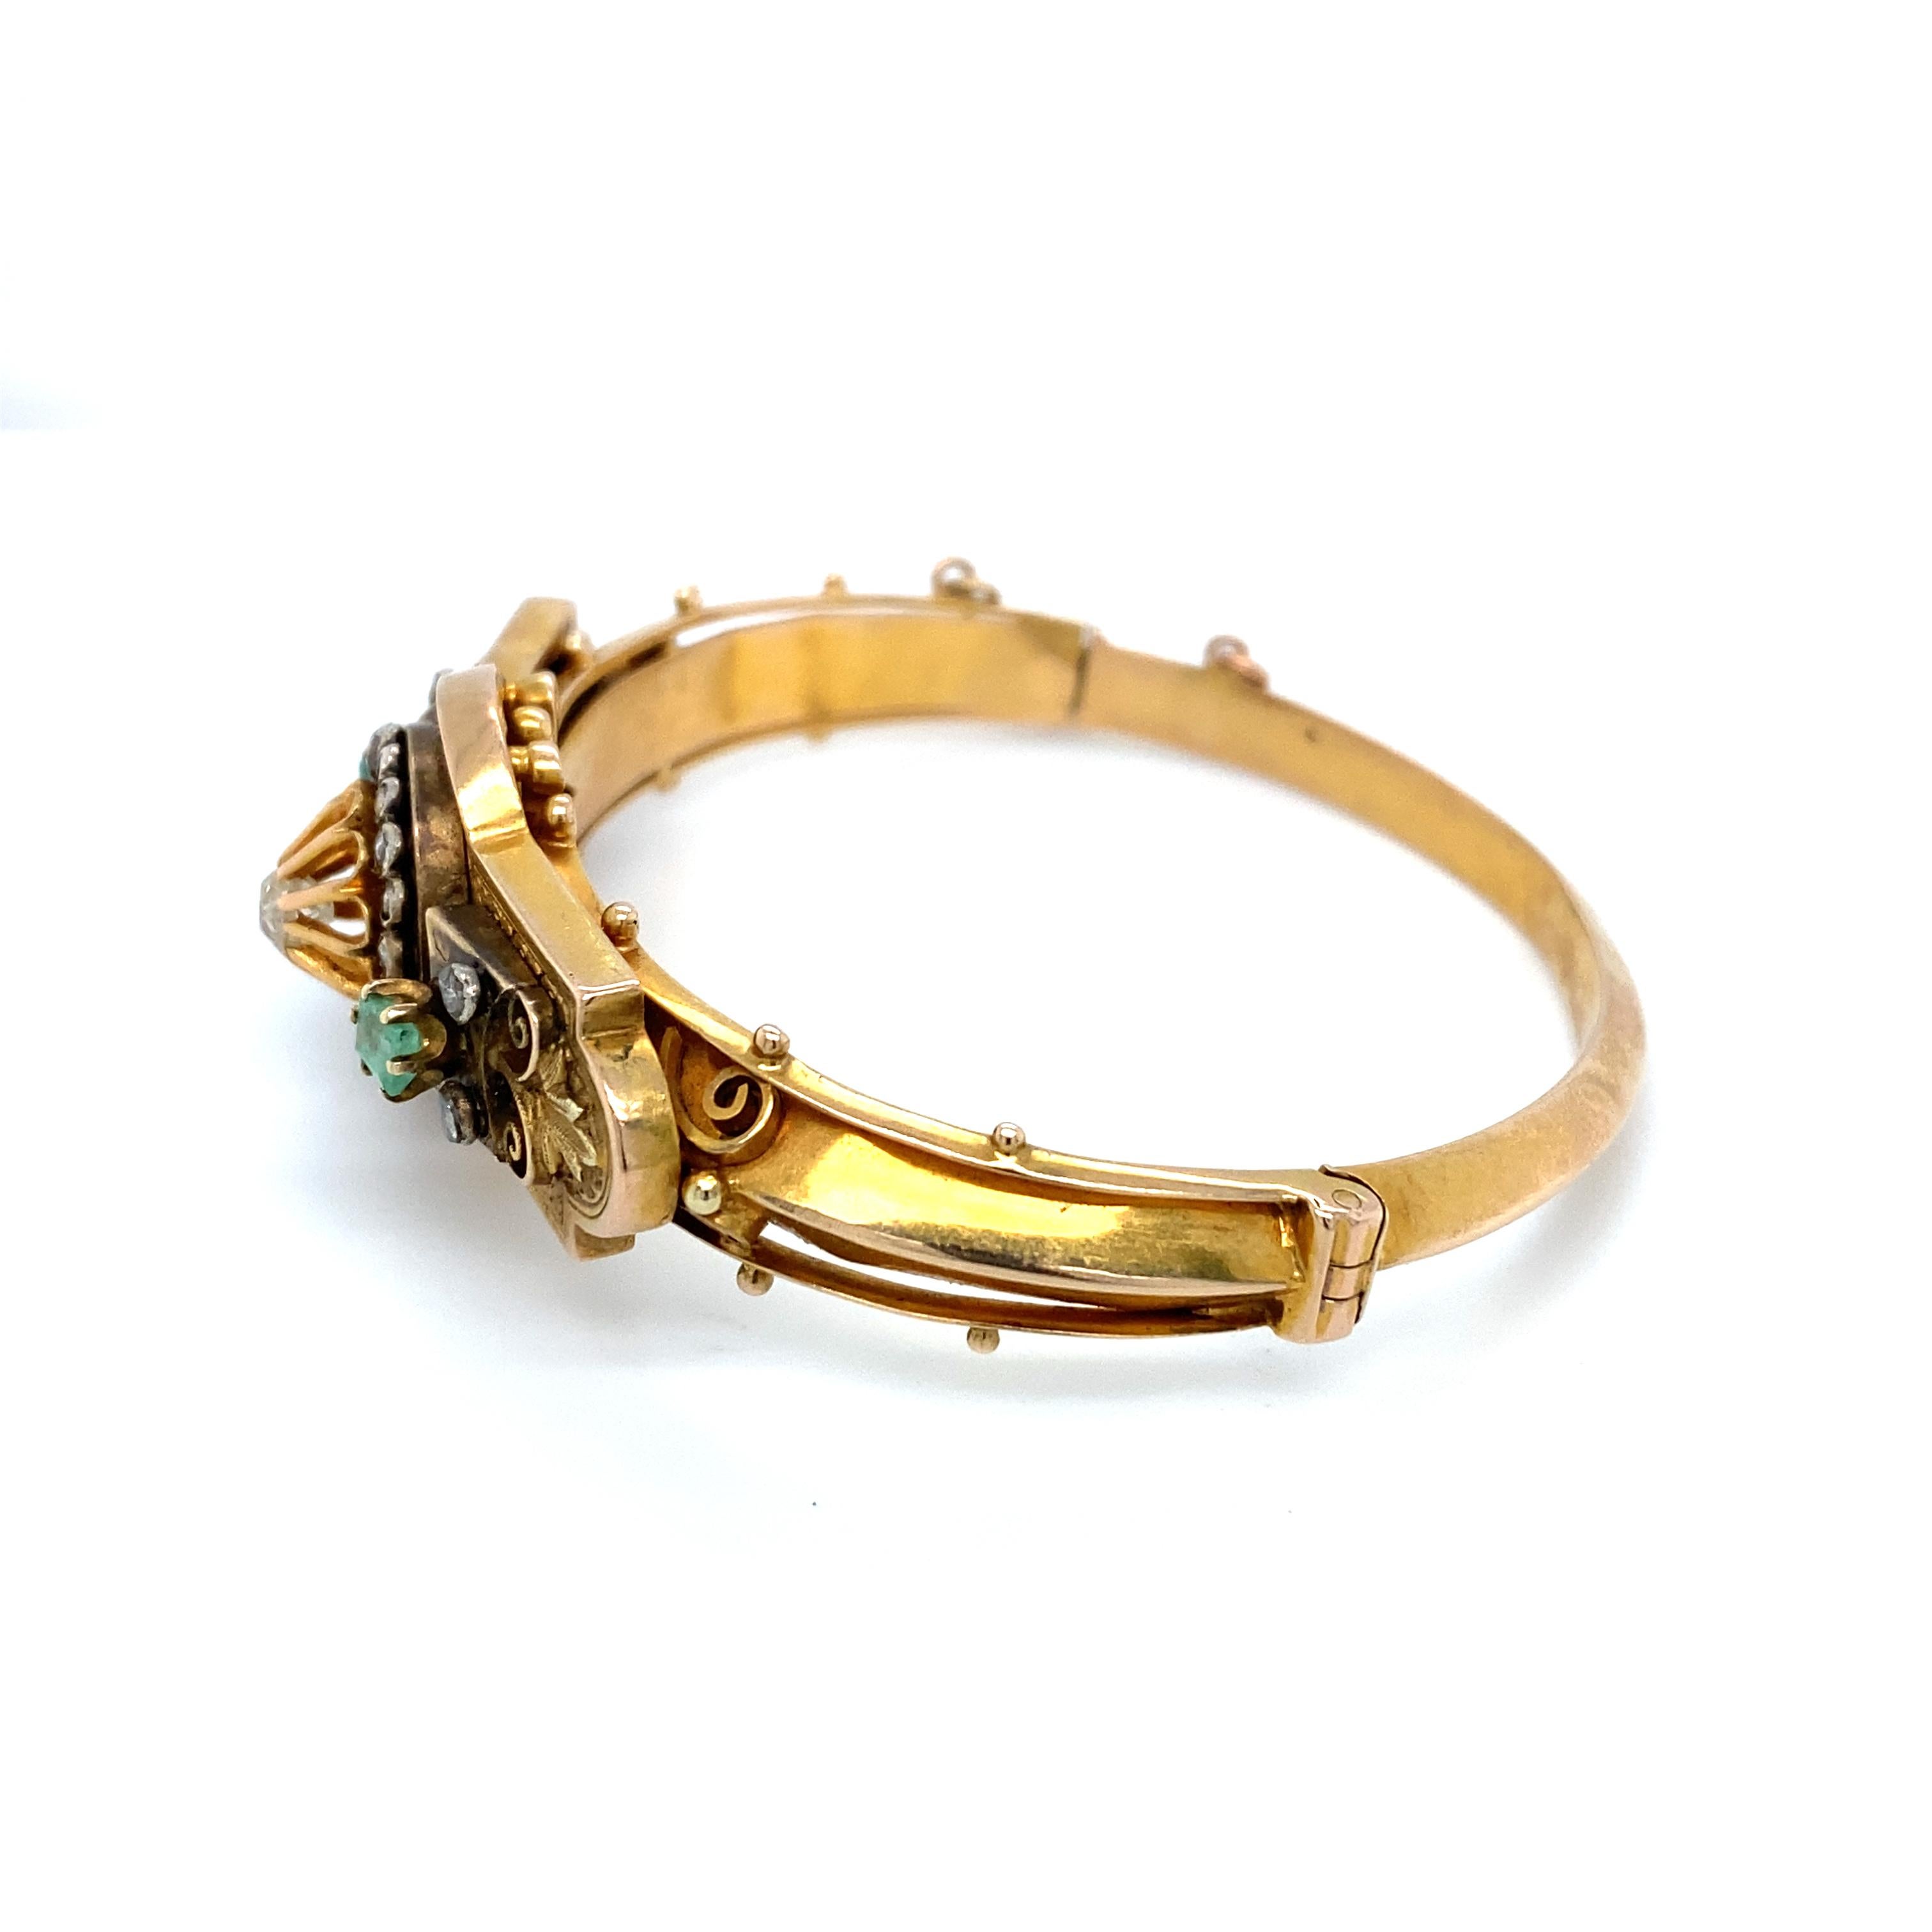 Women's or Men's 1870s Victorian Hinged Bracelet with Diamonds and Emeralds in 15 Karat Gold For Sale